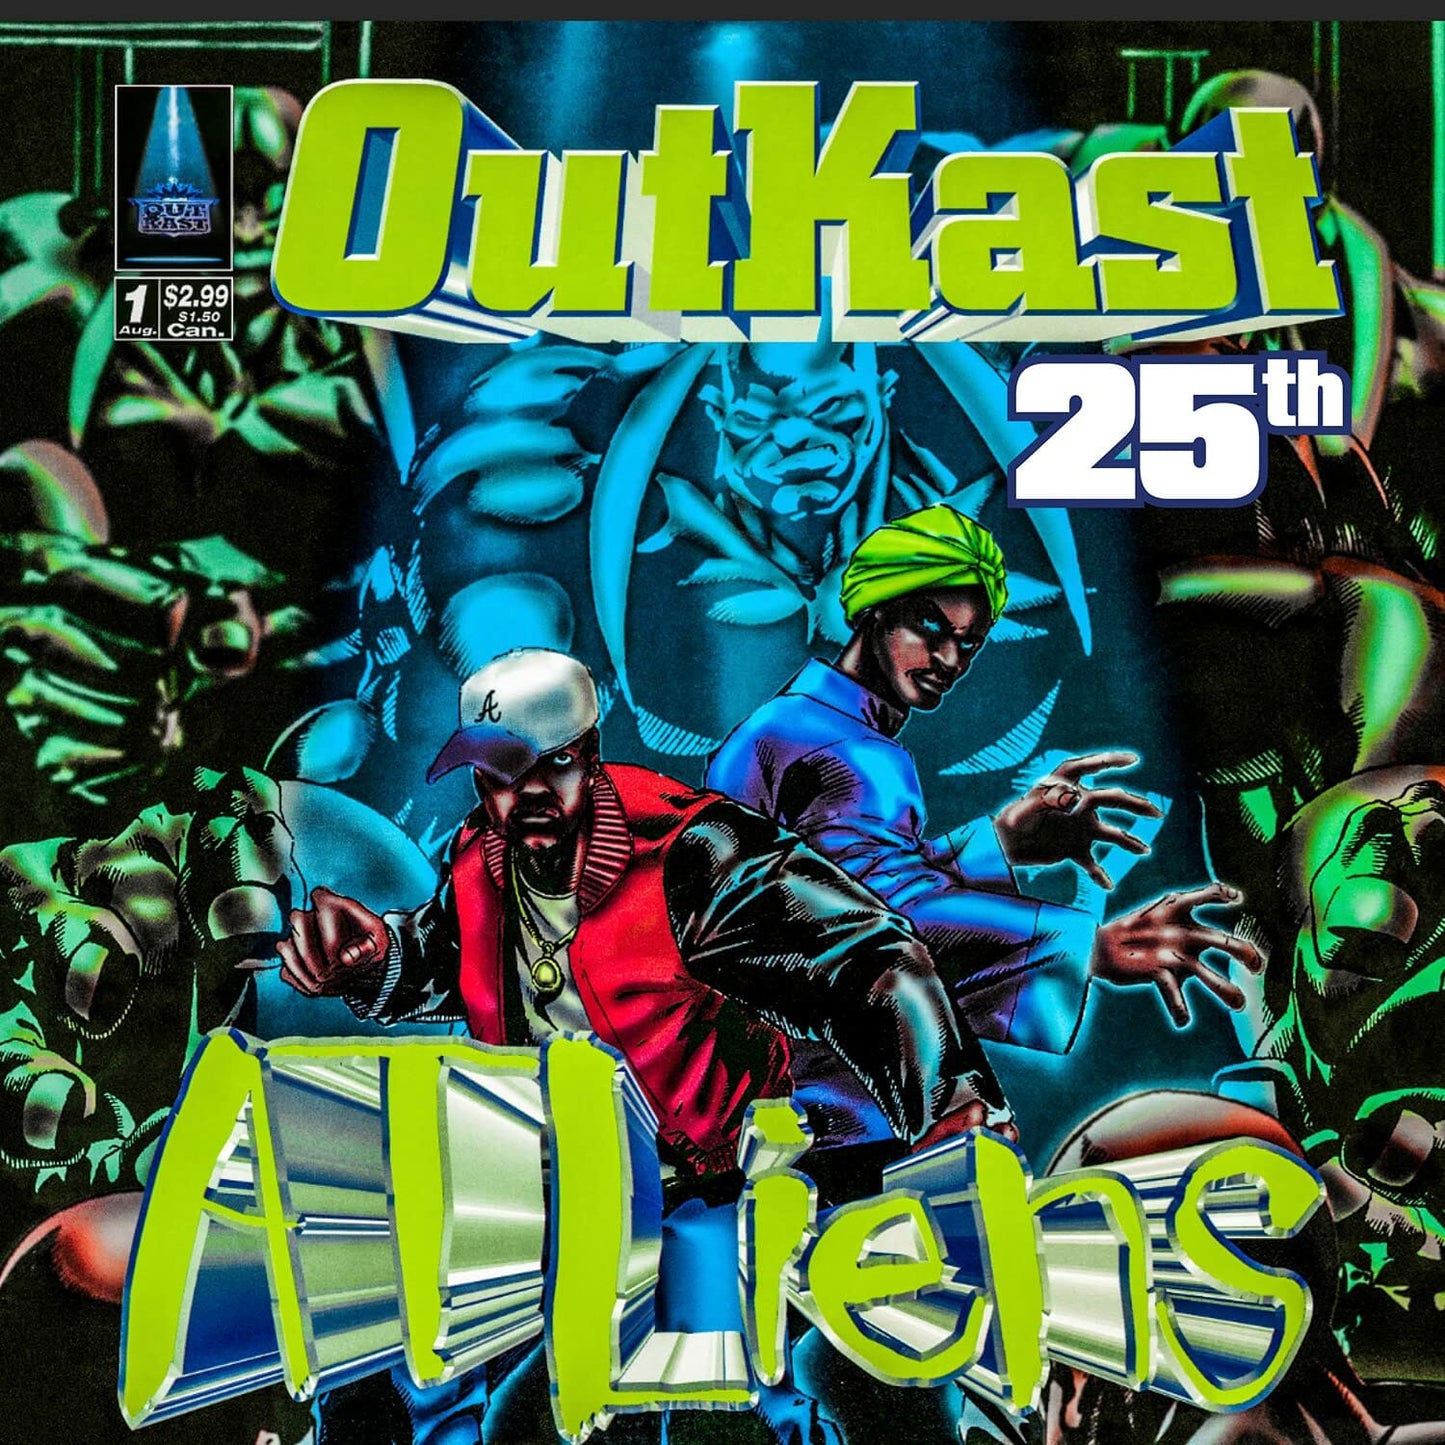 OutKast - "ATLiens" 25th Anniversary Edition Box Set